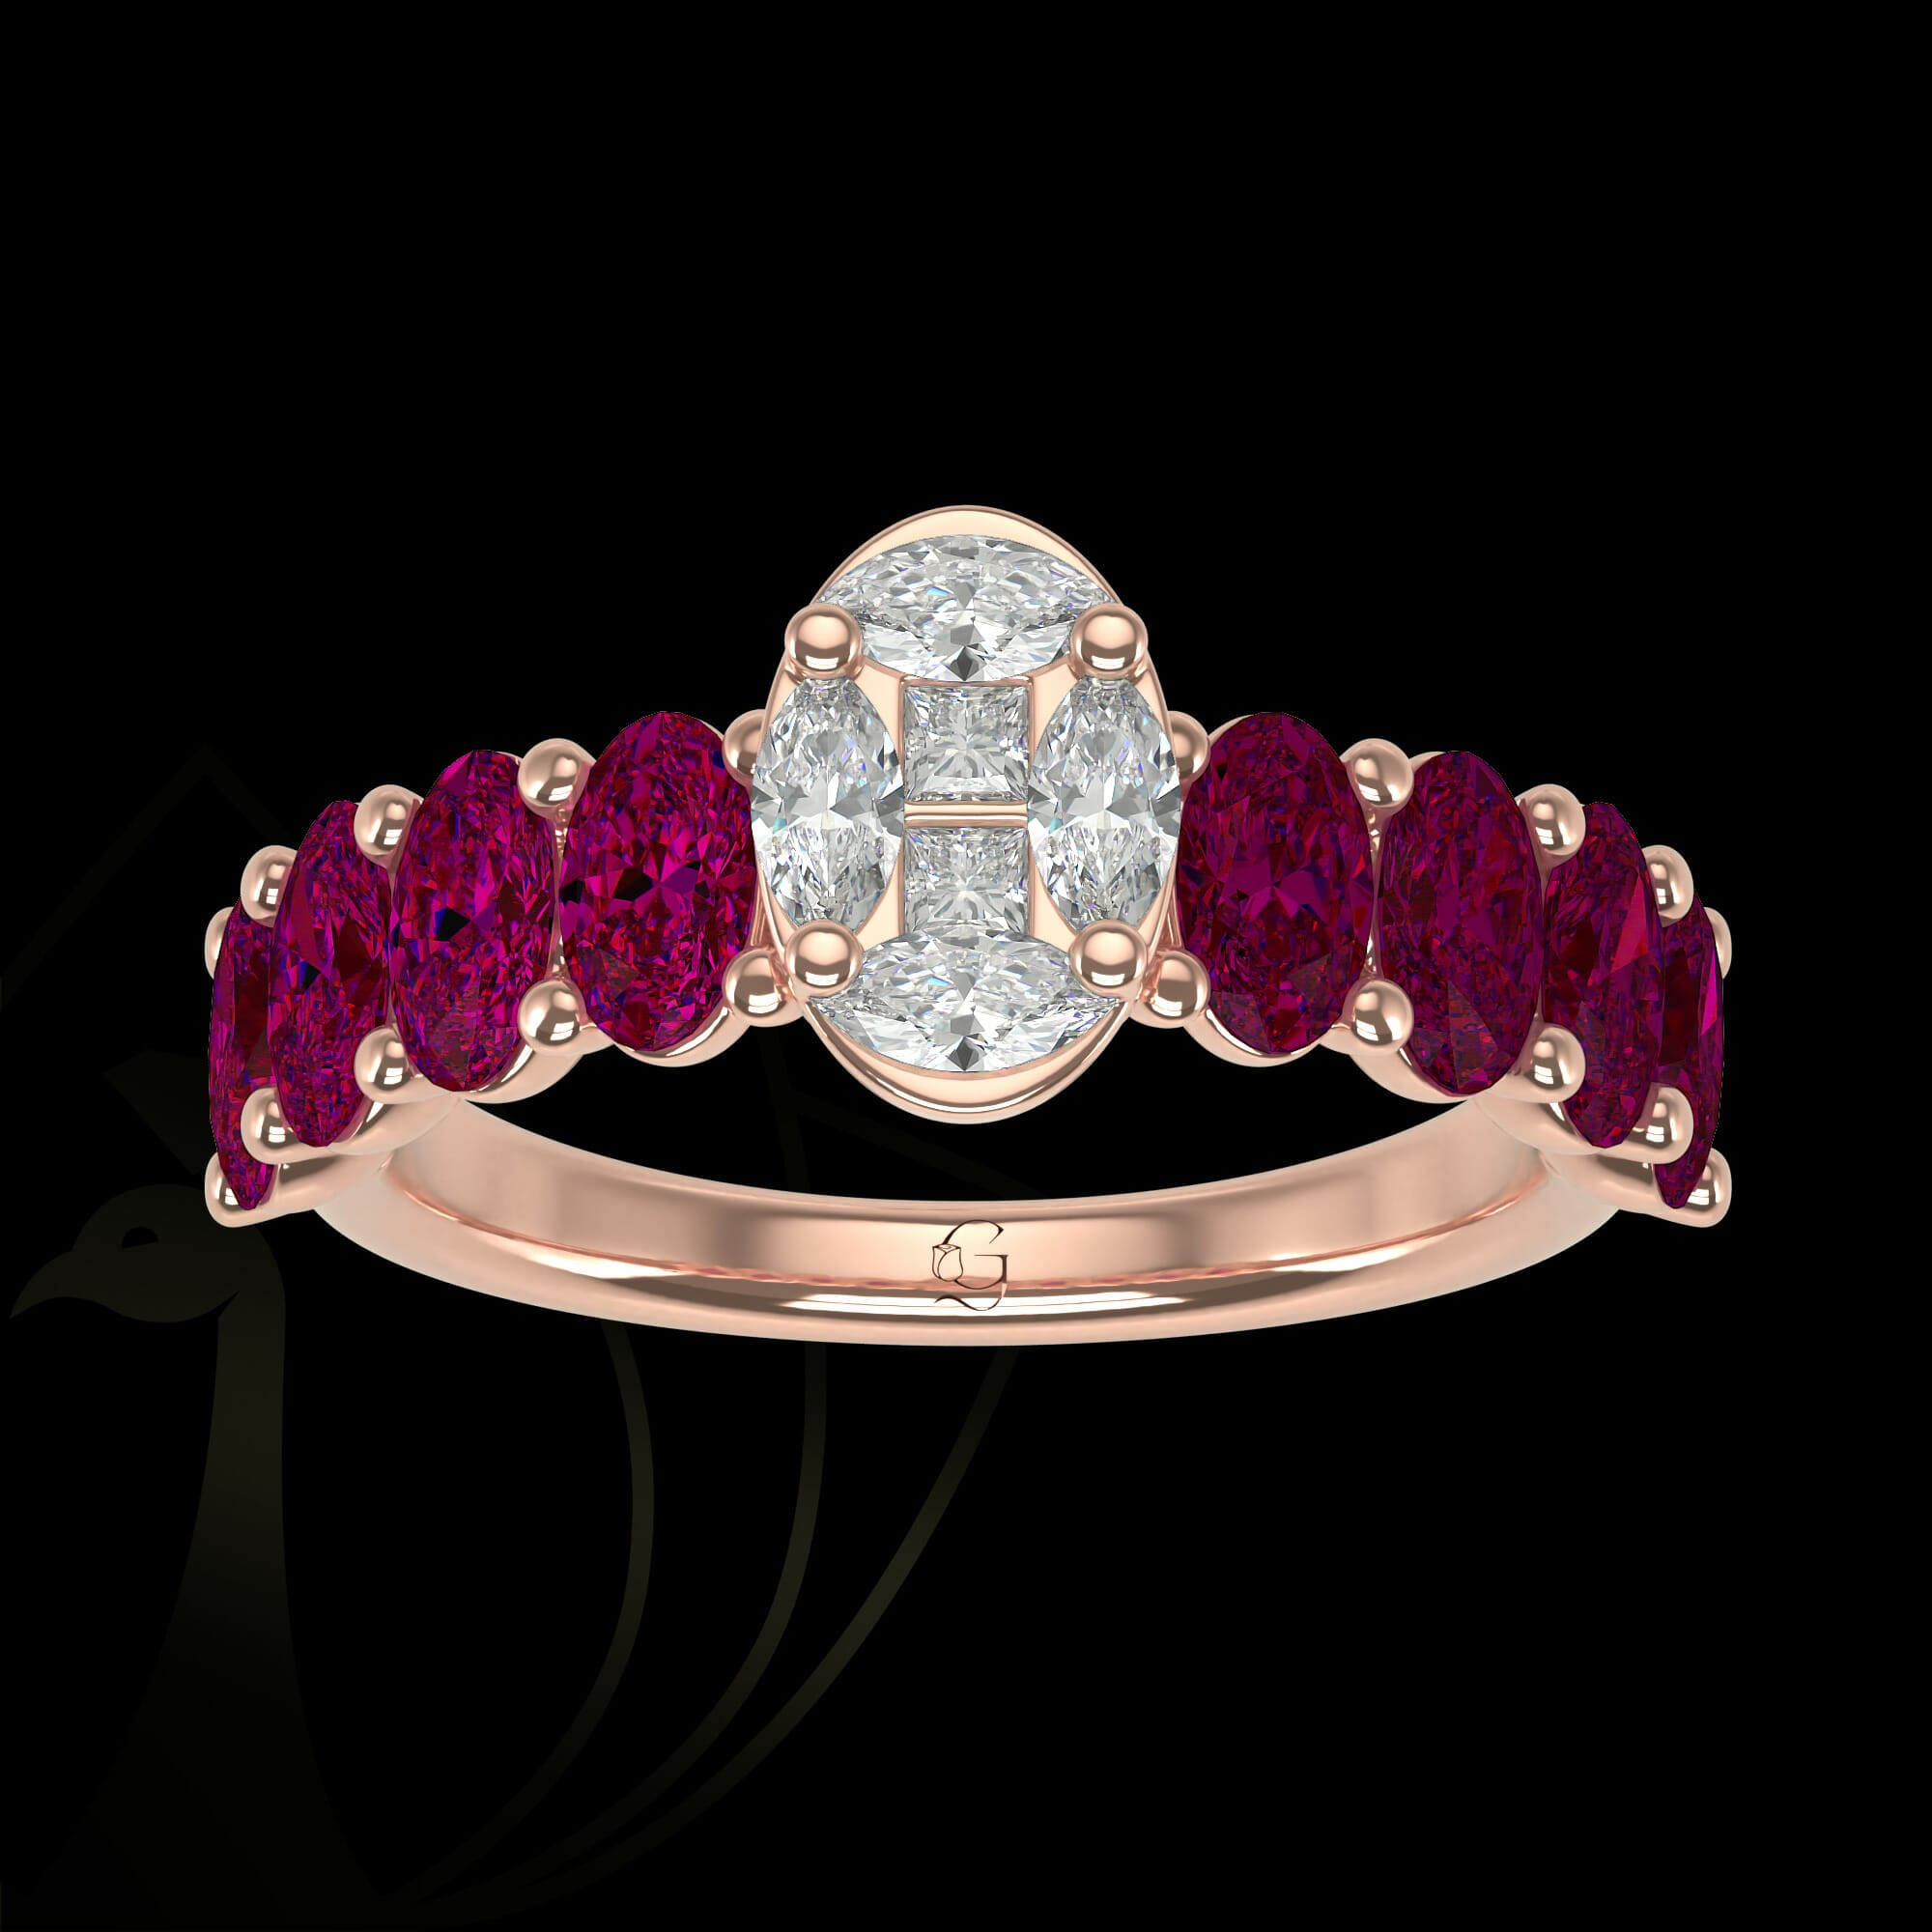 The blush surprise diamond ring with oval solitaire-look precious garnets set in 18K rose- gold.